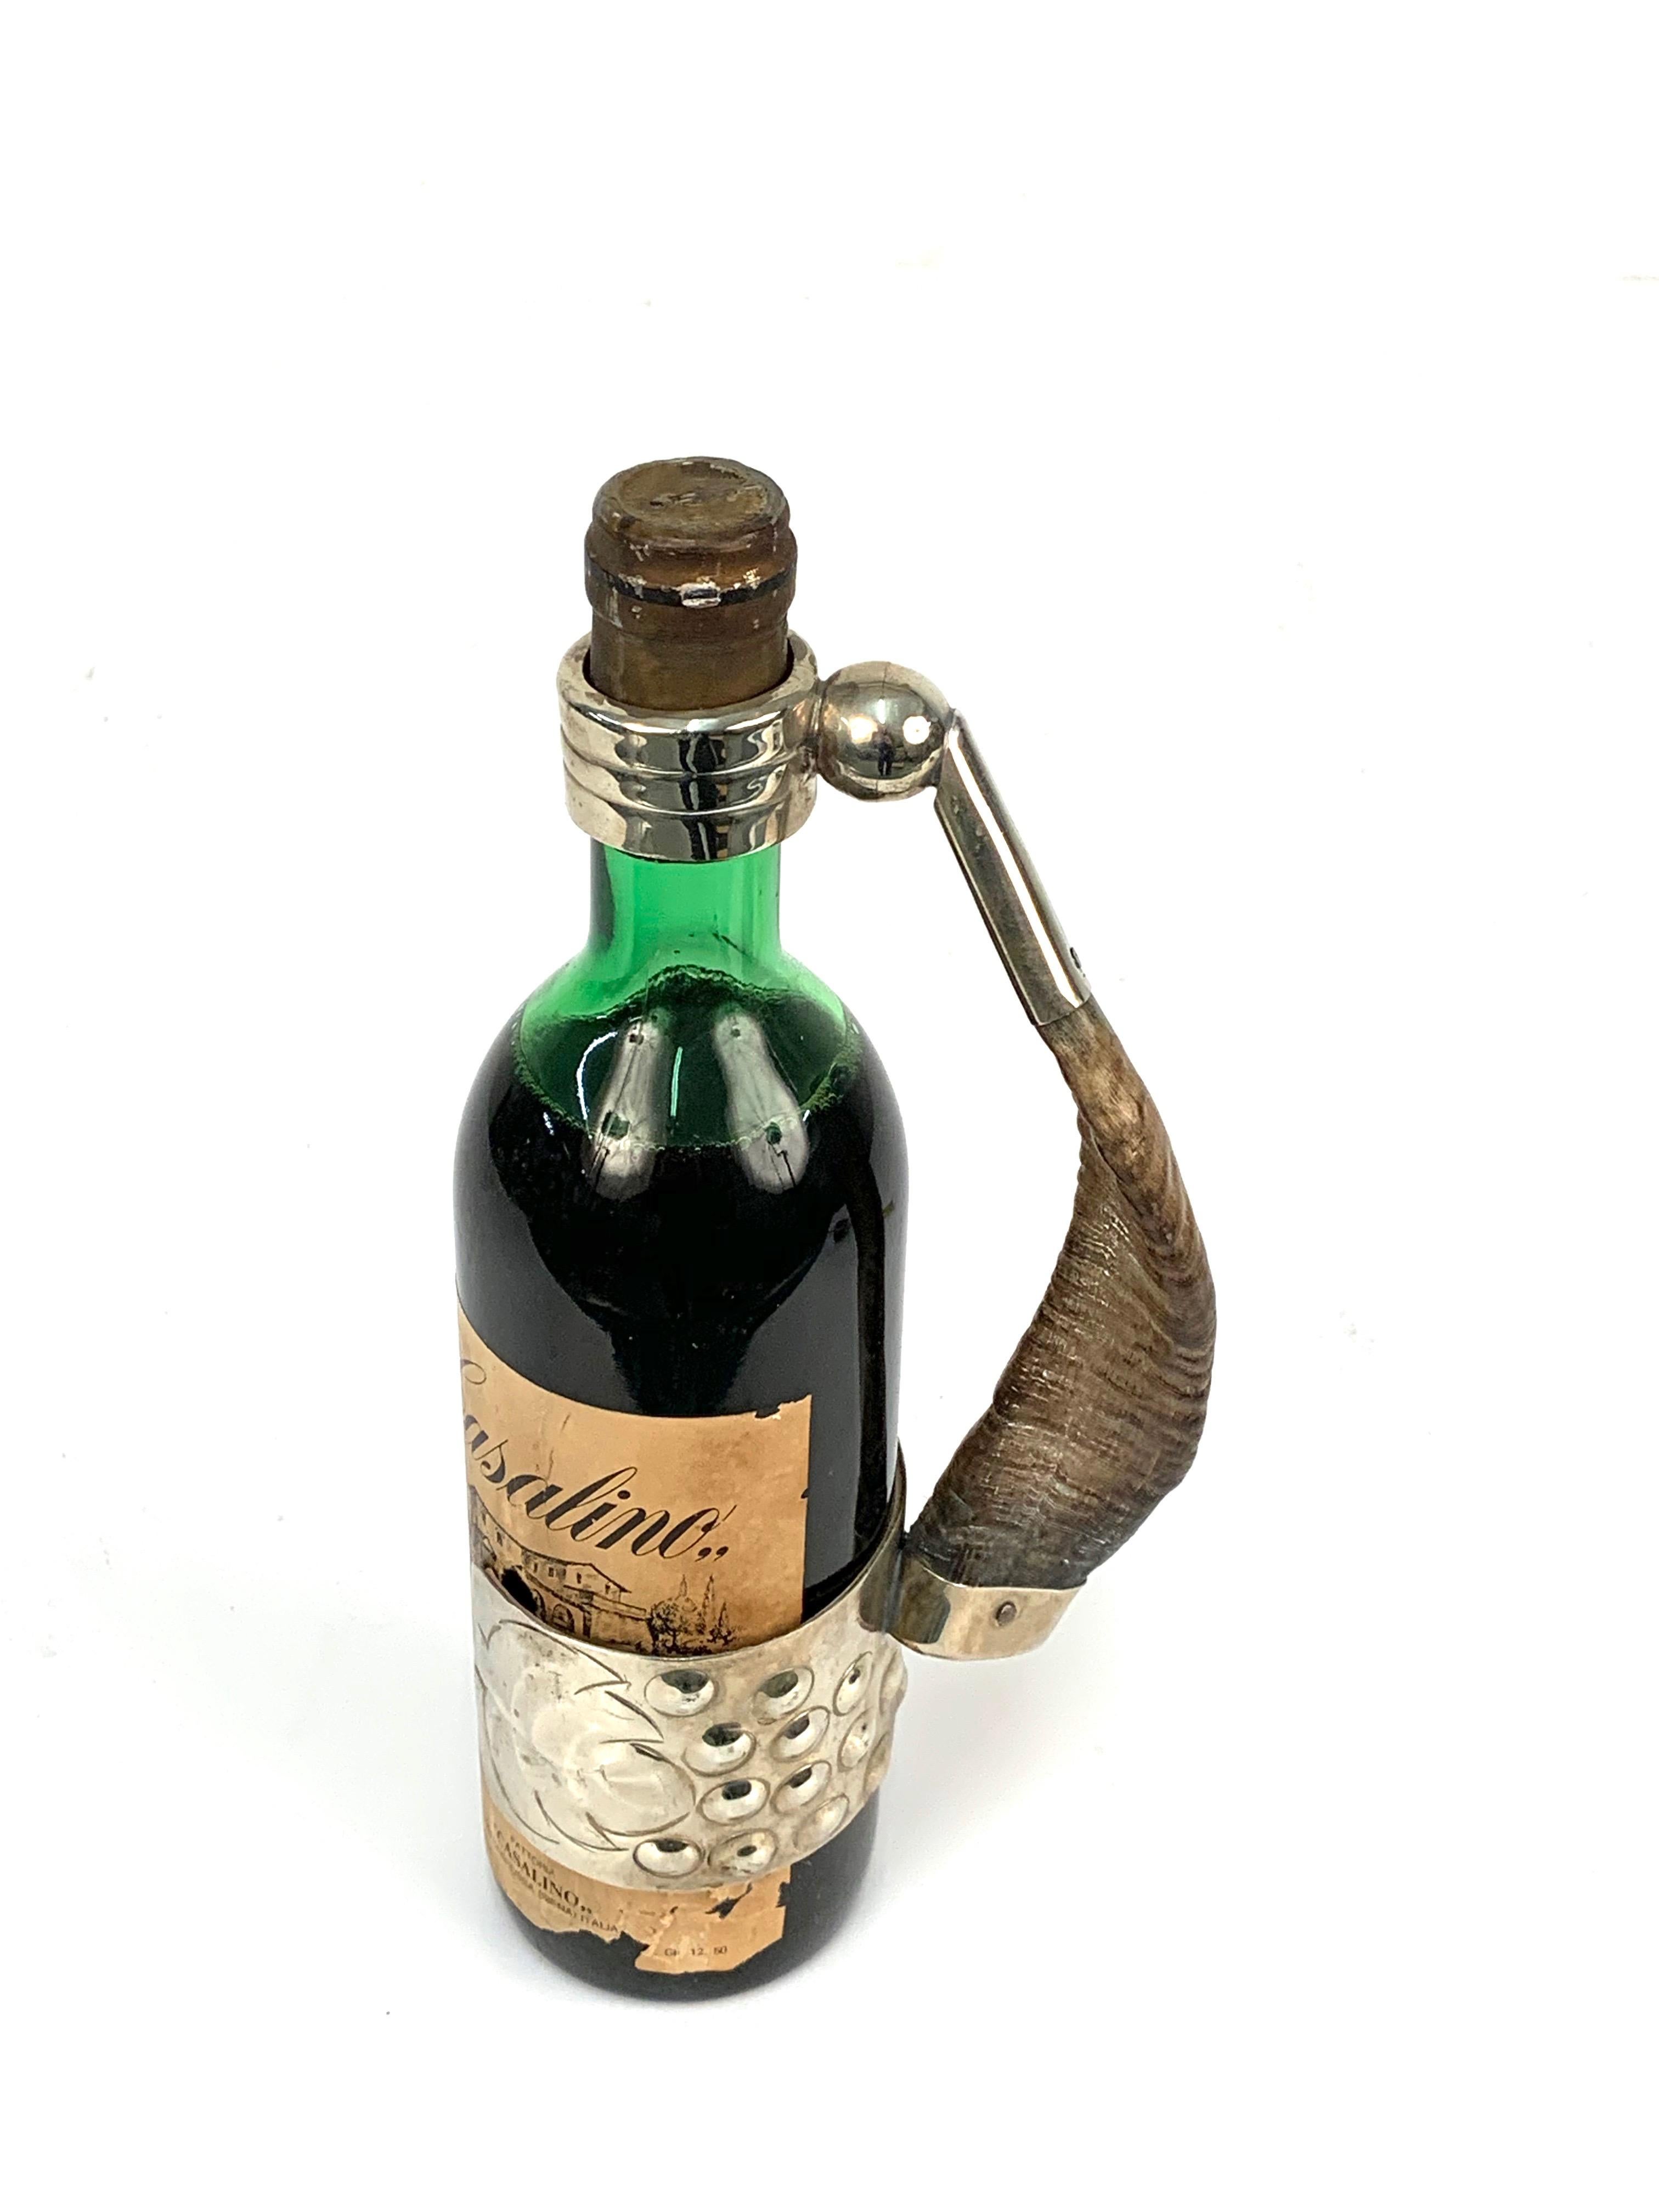 Iconic and elegant silver plated and wood wine pourer. This fantastic piece was produced in Italy during the 1970s.

It is made of simple and fascinating silver lines with a focal point on the Horn handle. The inside is made of soft